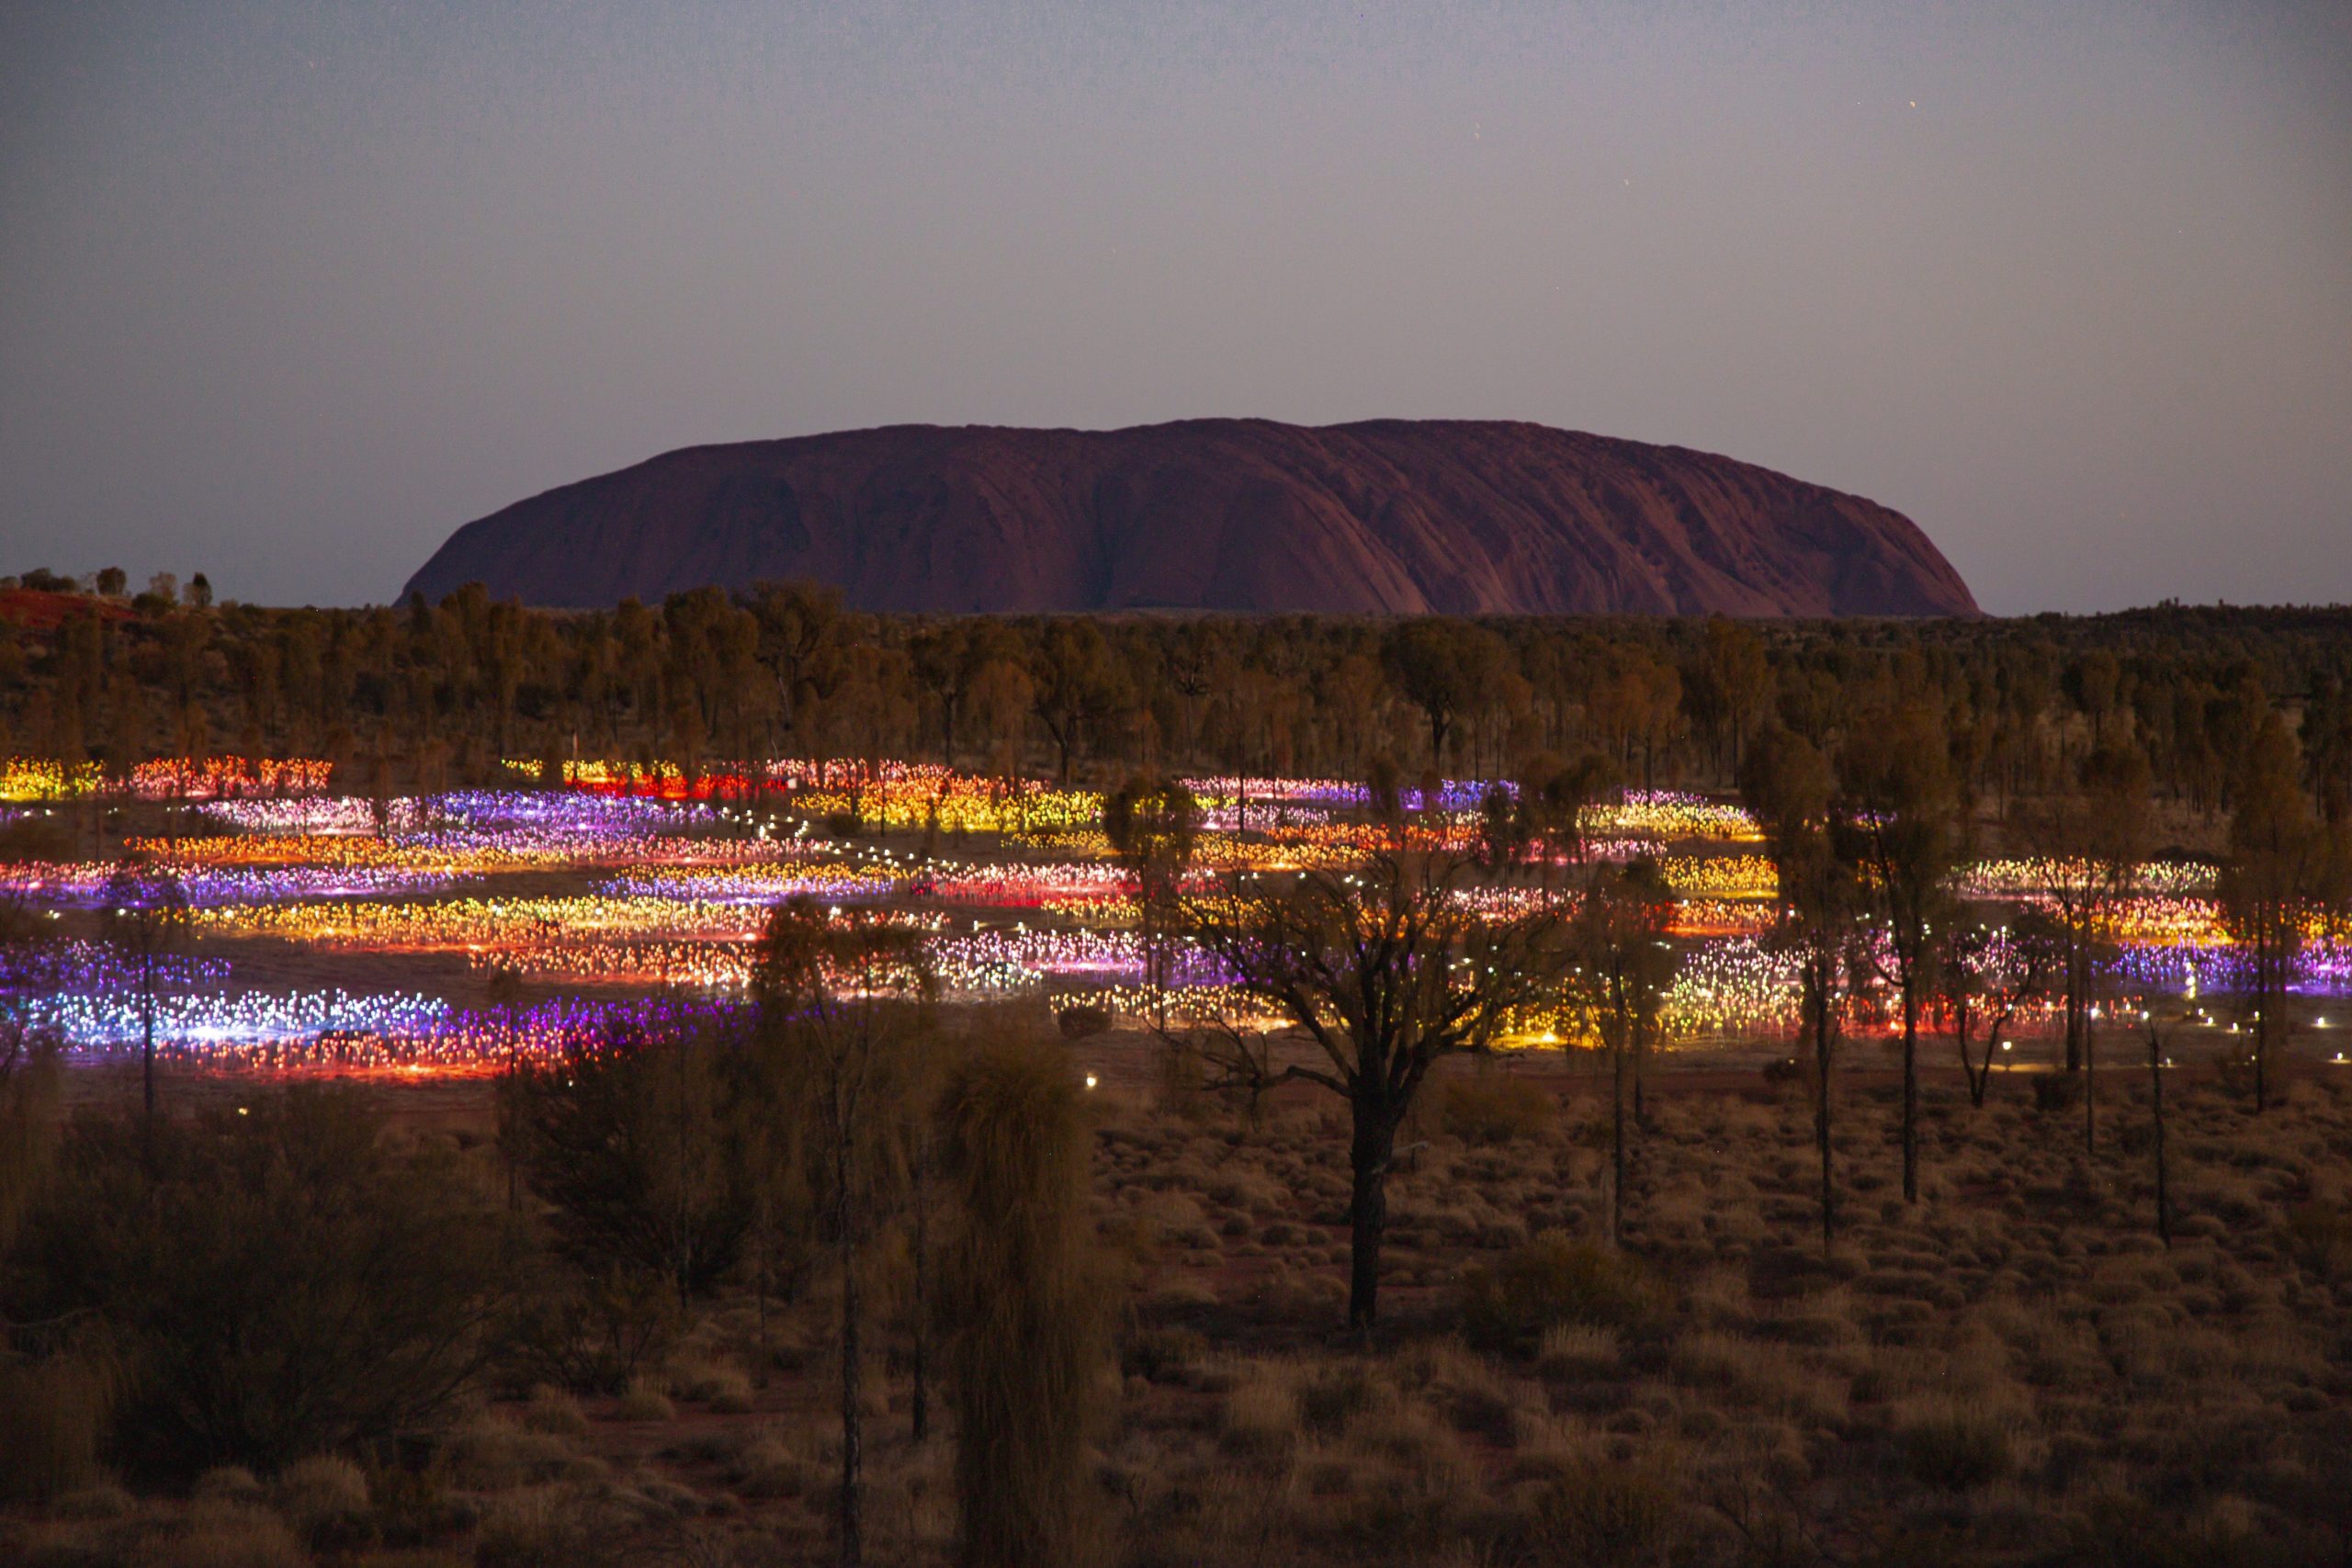 The Field of Light art installation, a global phenomenon by internationally acclaimed artist Bruce Munro, has come home to the place that inspired it - Uluru.<br /><br />Uluru, or Ayers Rock, is a massive sandstone monolith in the heart of the Northern Territory's arid "Red Centre". Uluru is sacred to indigenous Australians and is thought to have started forming around 550 million years ago.